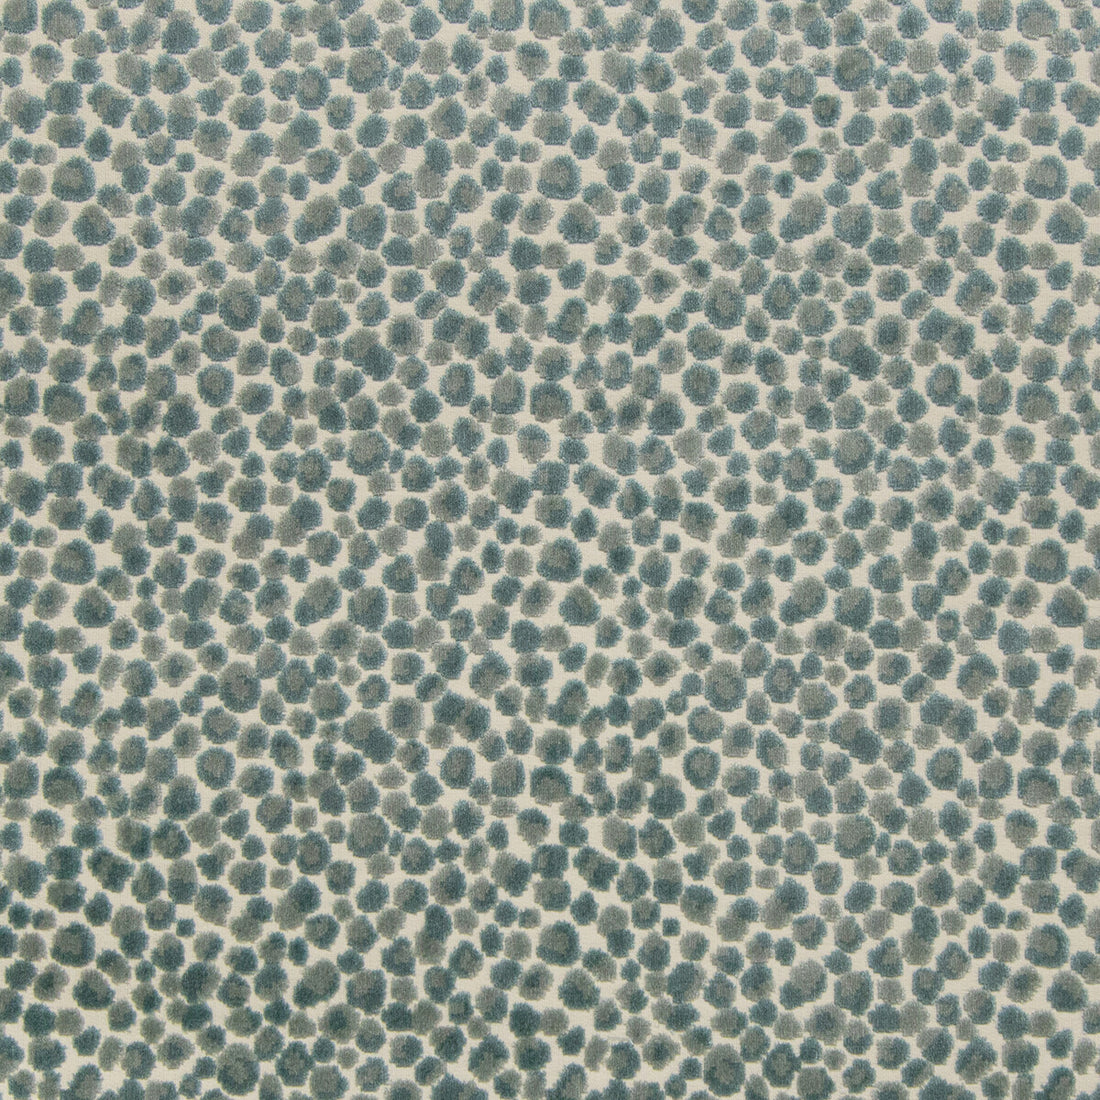 Circulate fabric in teal color - pattern 34595.511.0 - by Kravet Design in the Modern Velvets collection